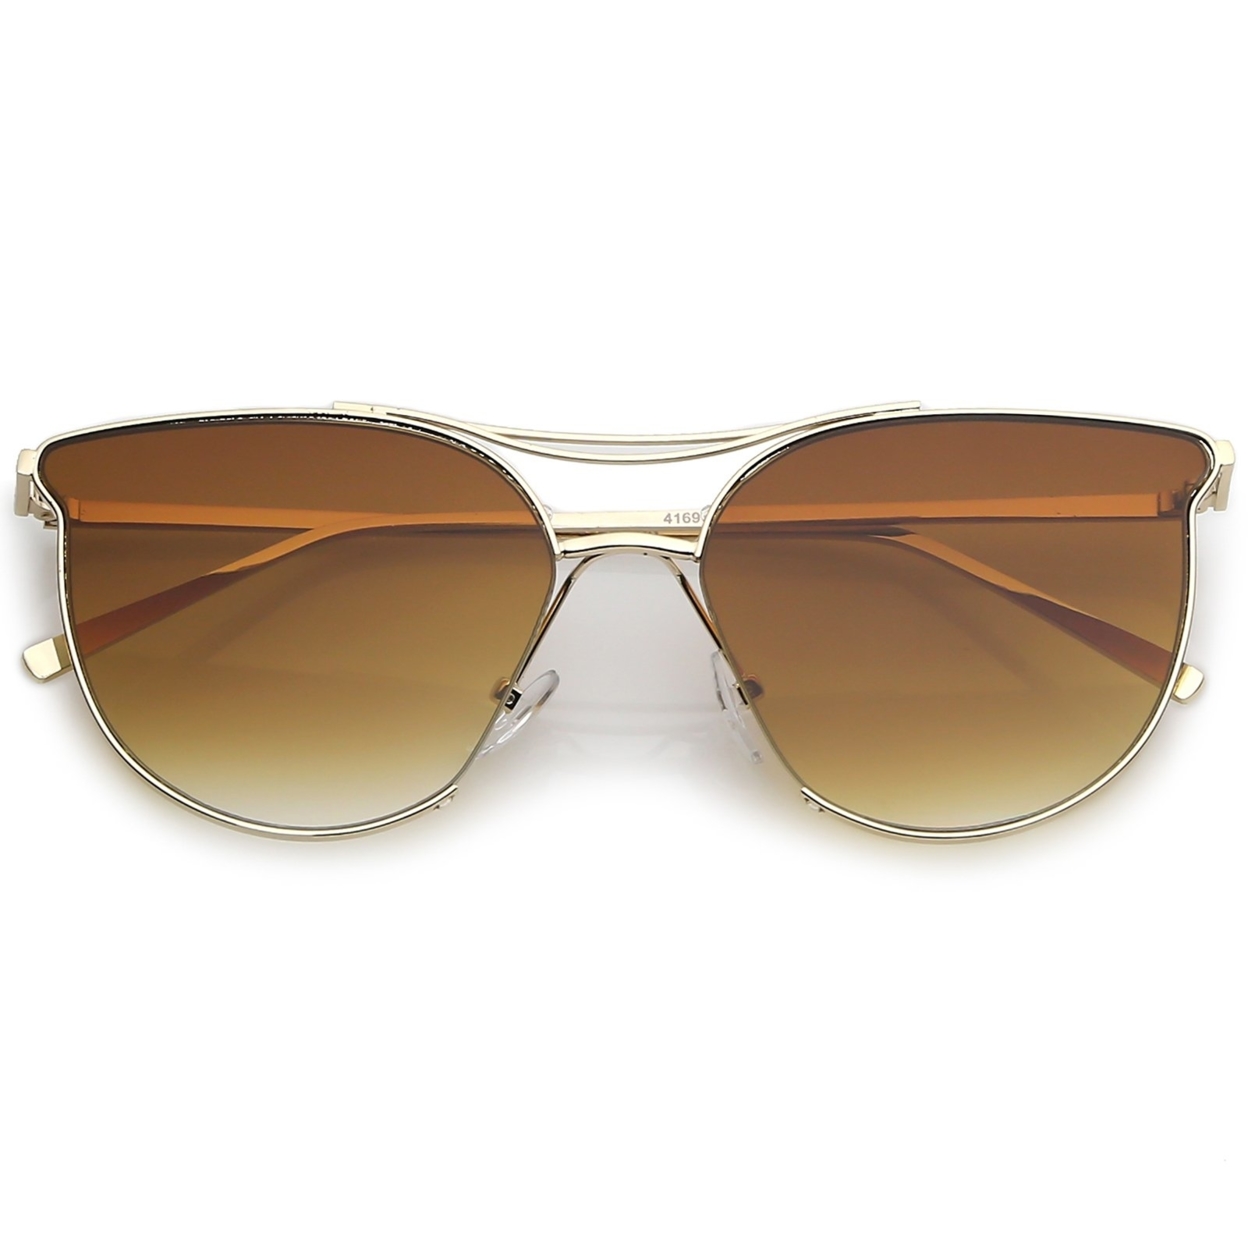 Modern Metal Cat Eye Sunglasses With Slim Arms Double Nose Bridge Round Flat Lens 55mm - Gold / Amber